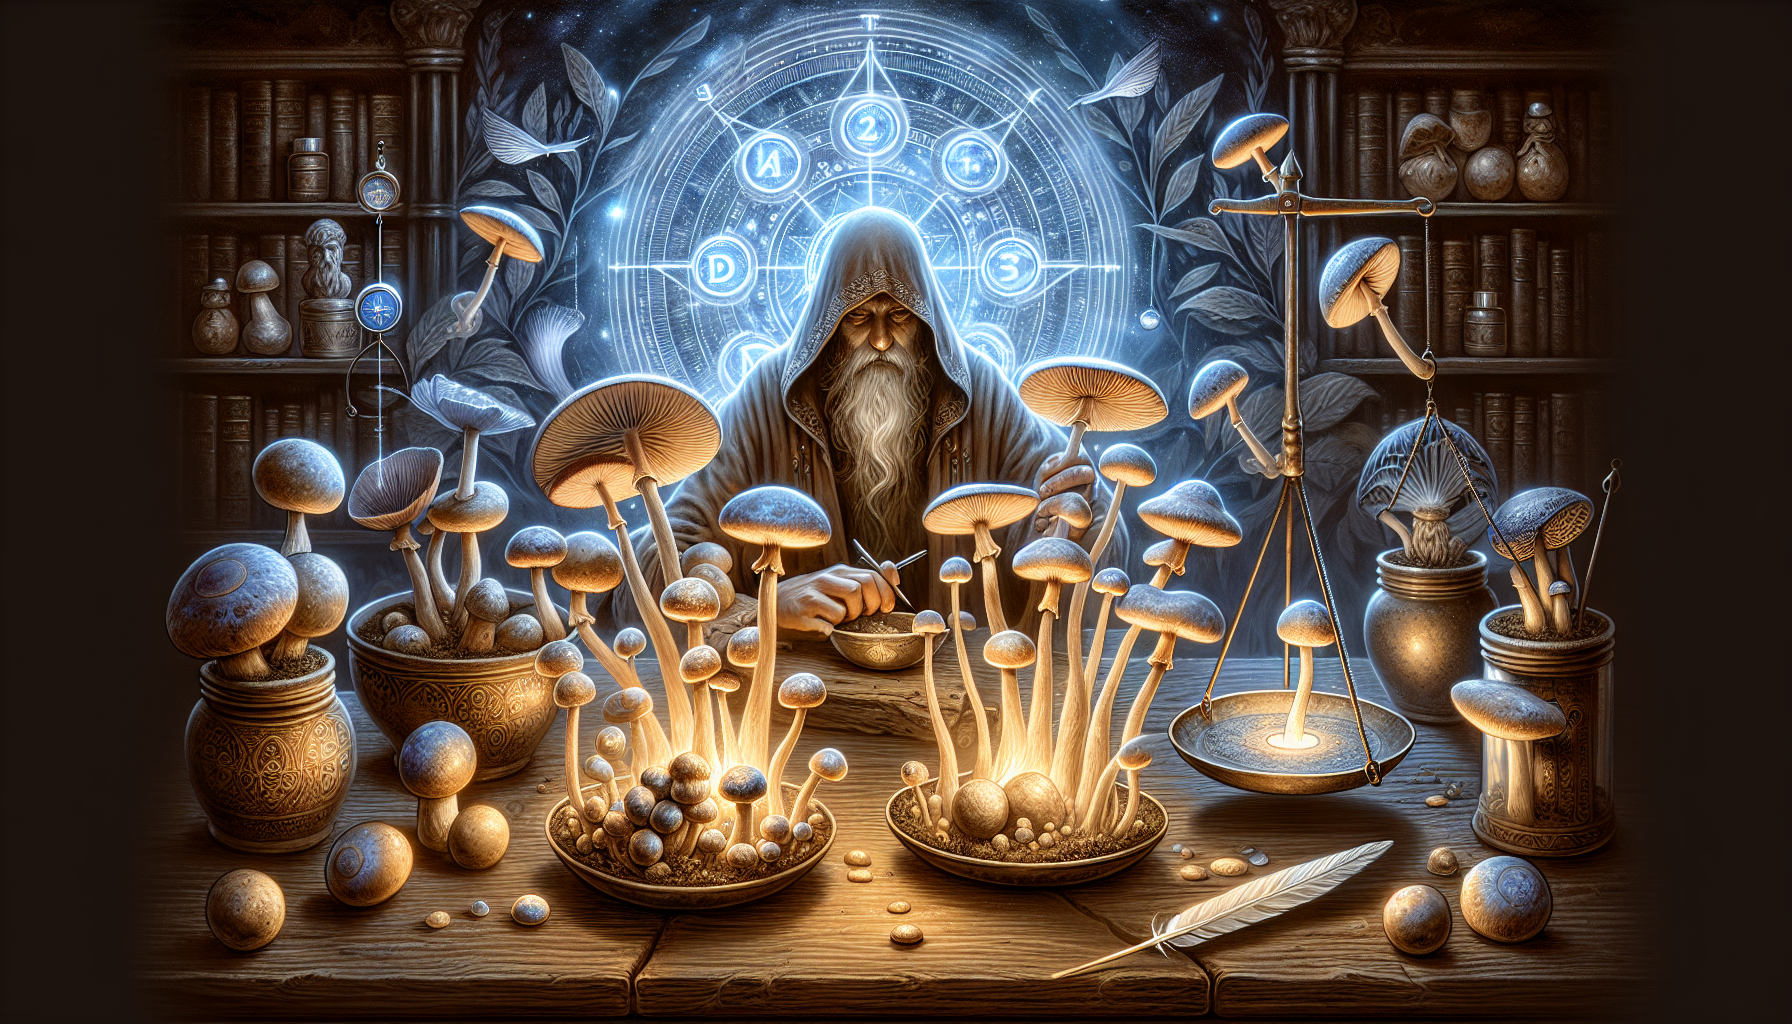 Artistic representation of selecting magic mushroom strains for therapy